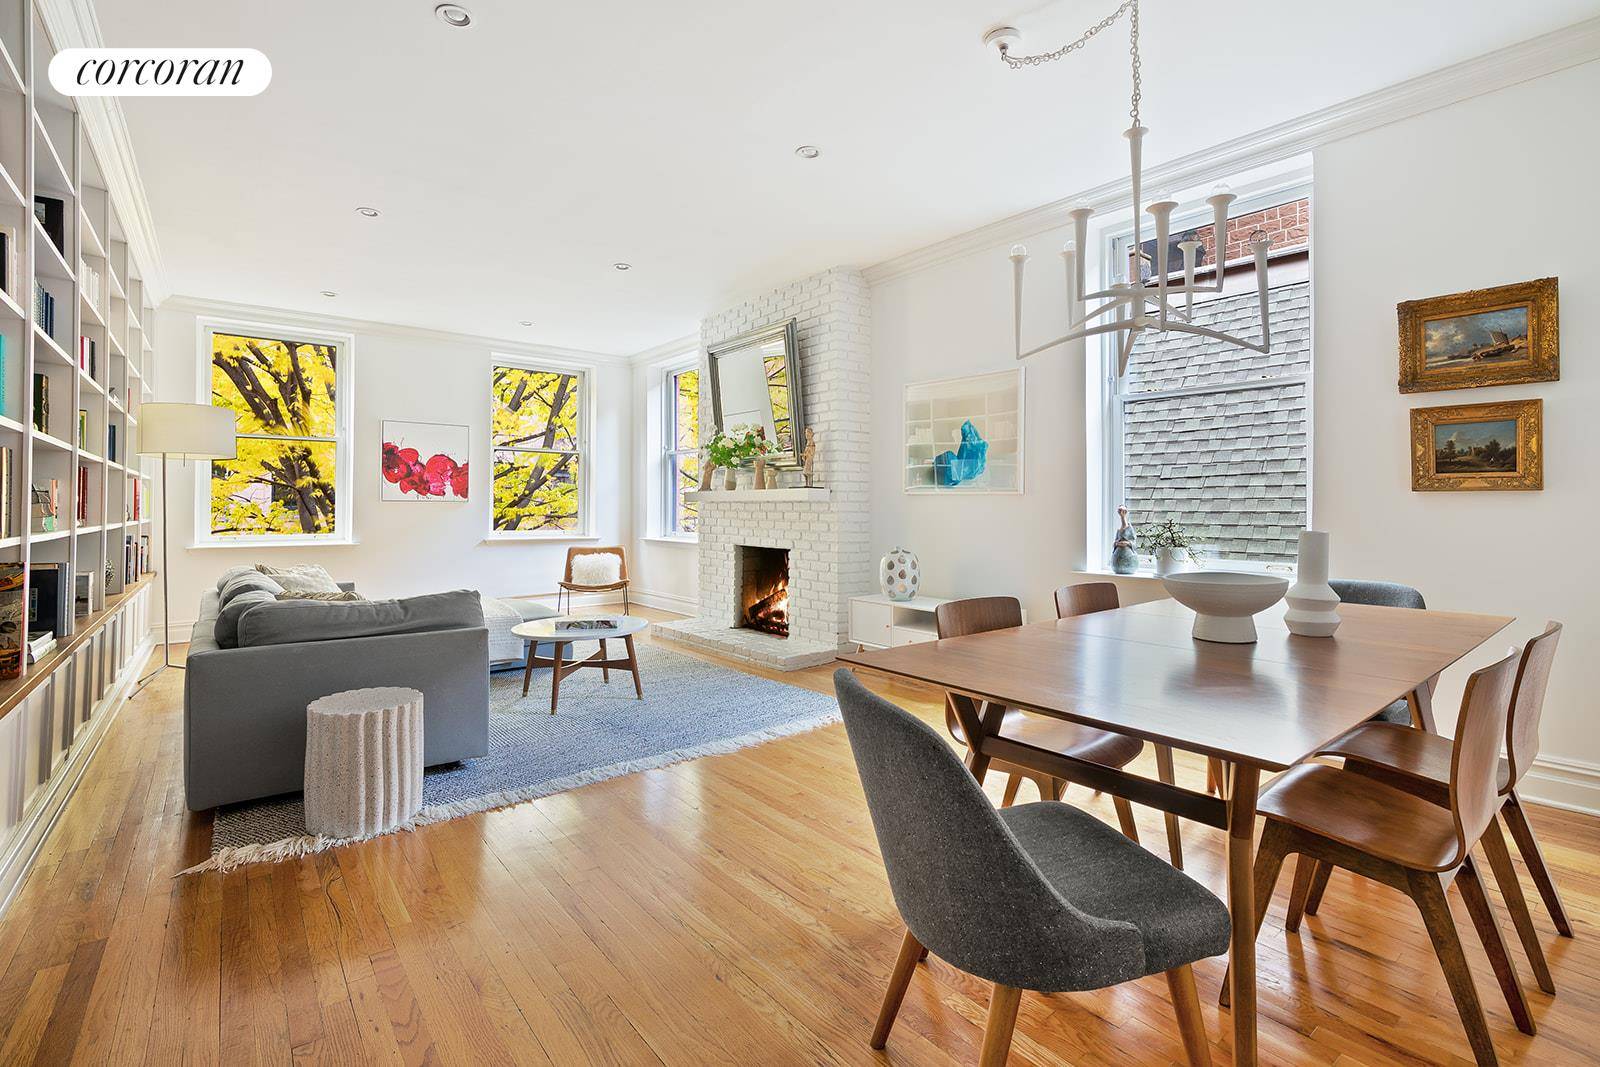 Rarely available Overlooking a premier, tree lined block in the heart of Brooklyn Heights, Residence 2A captivates with style, light and gracious proportions.